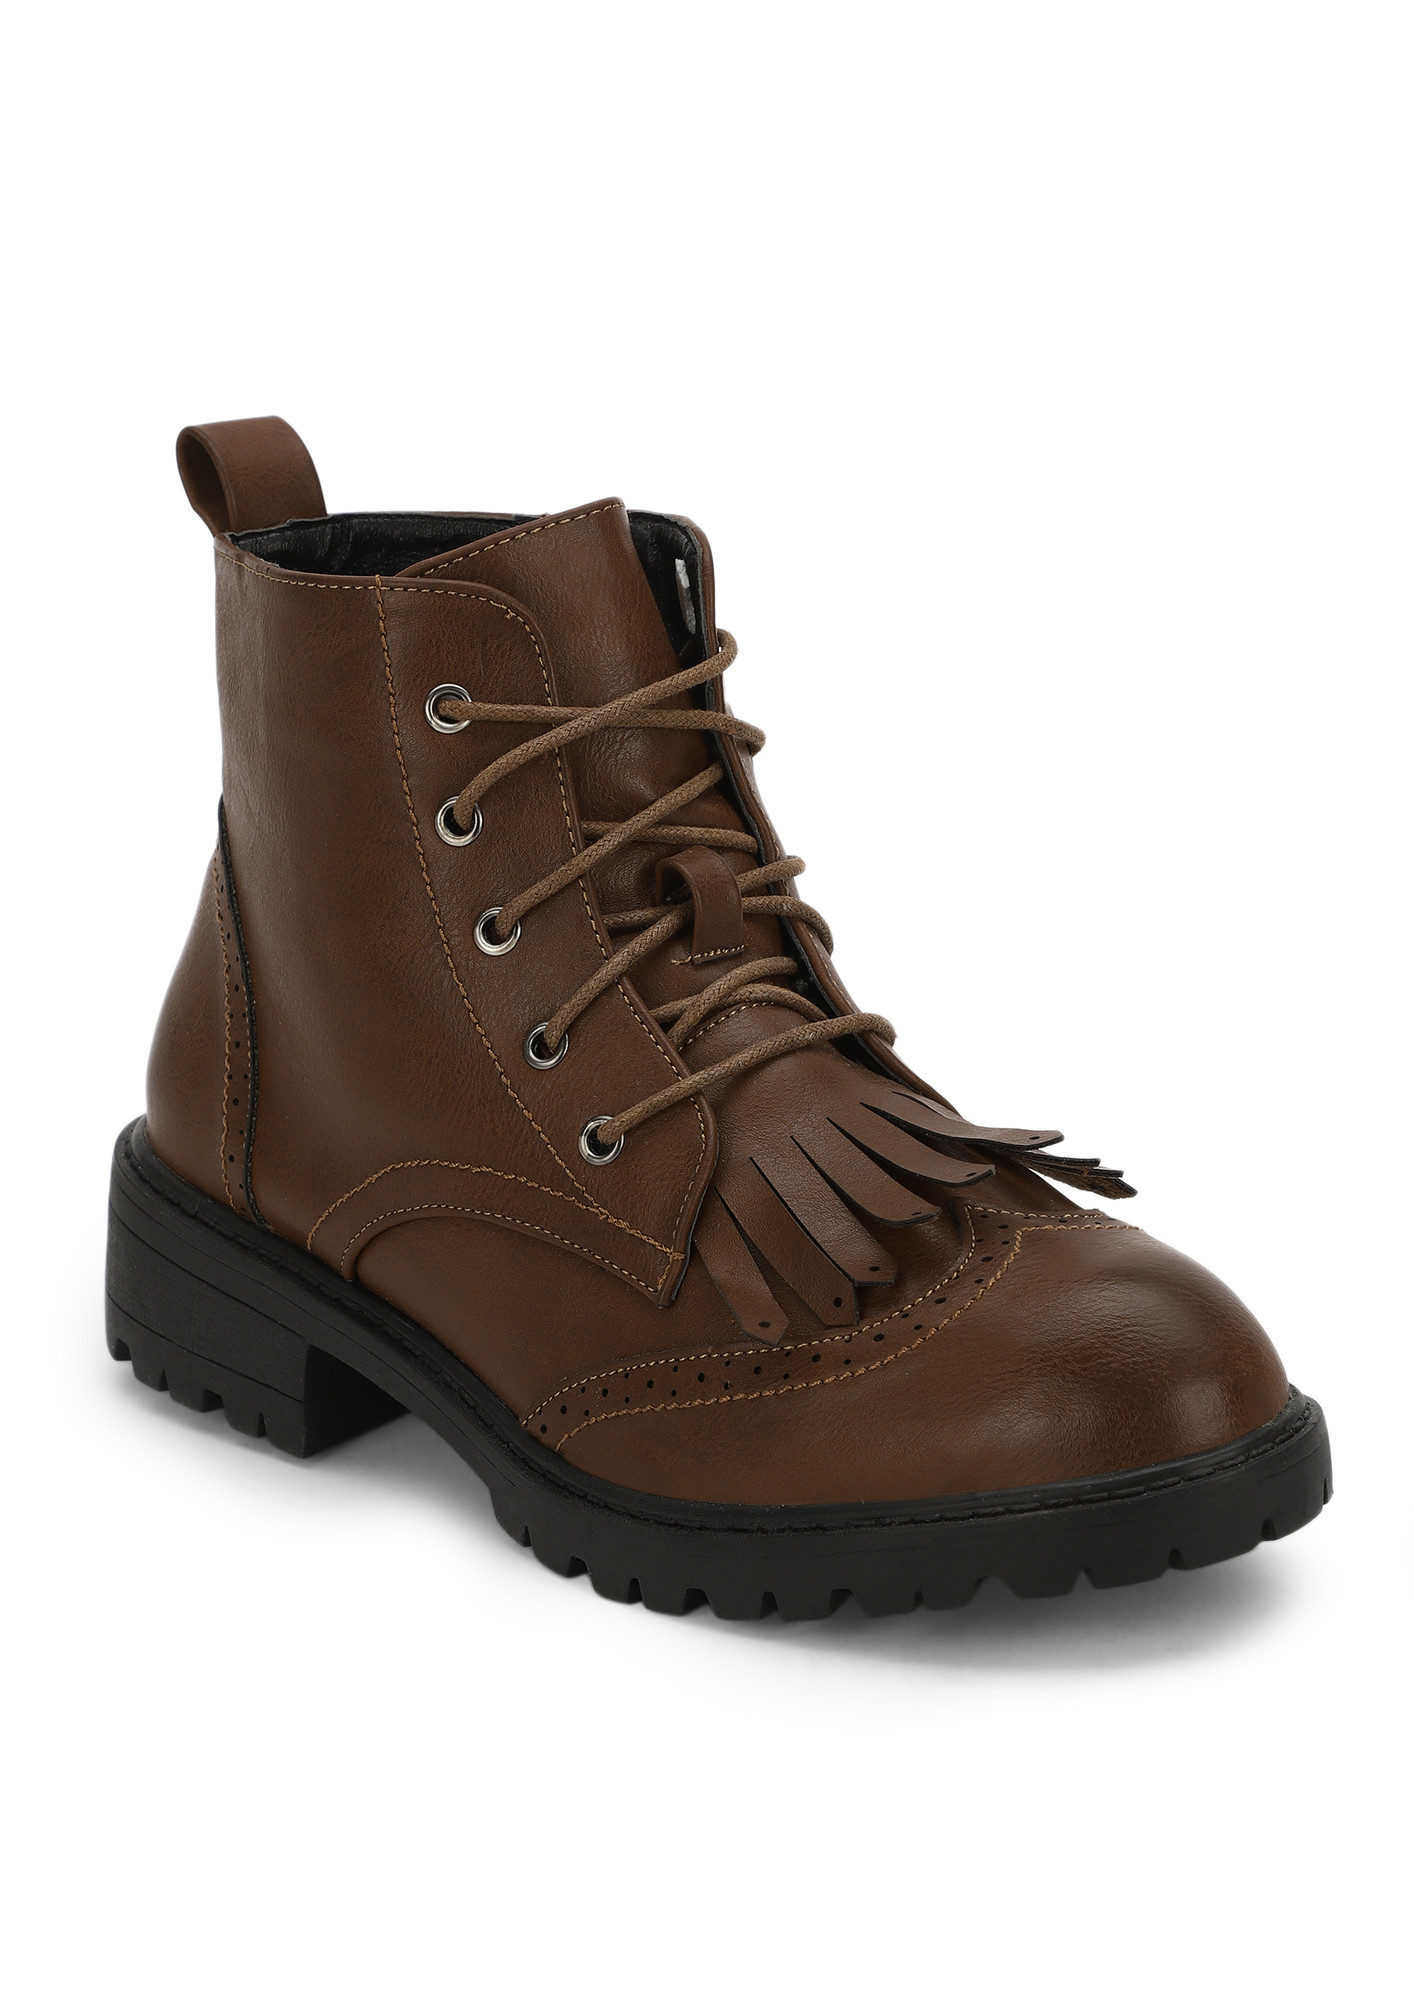 THE SMARTER THE STRONGER BROWN DR. MARTENS BOOTS